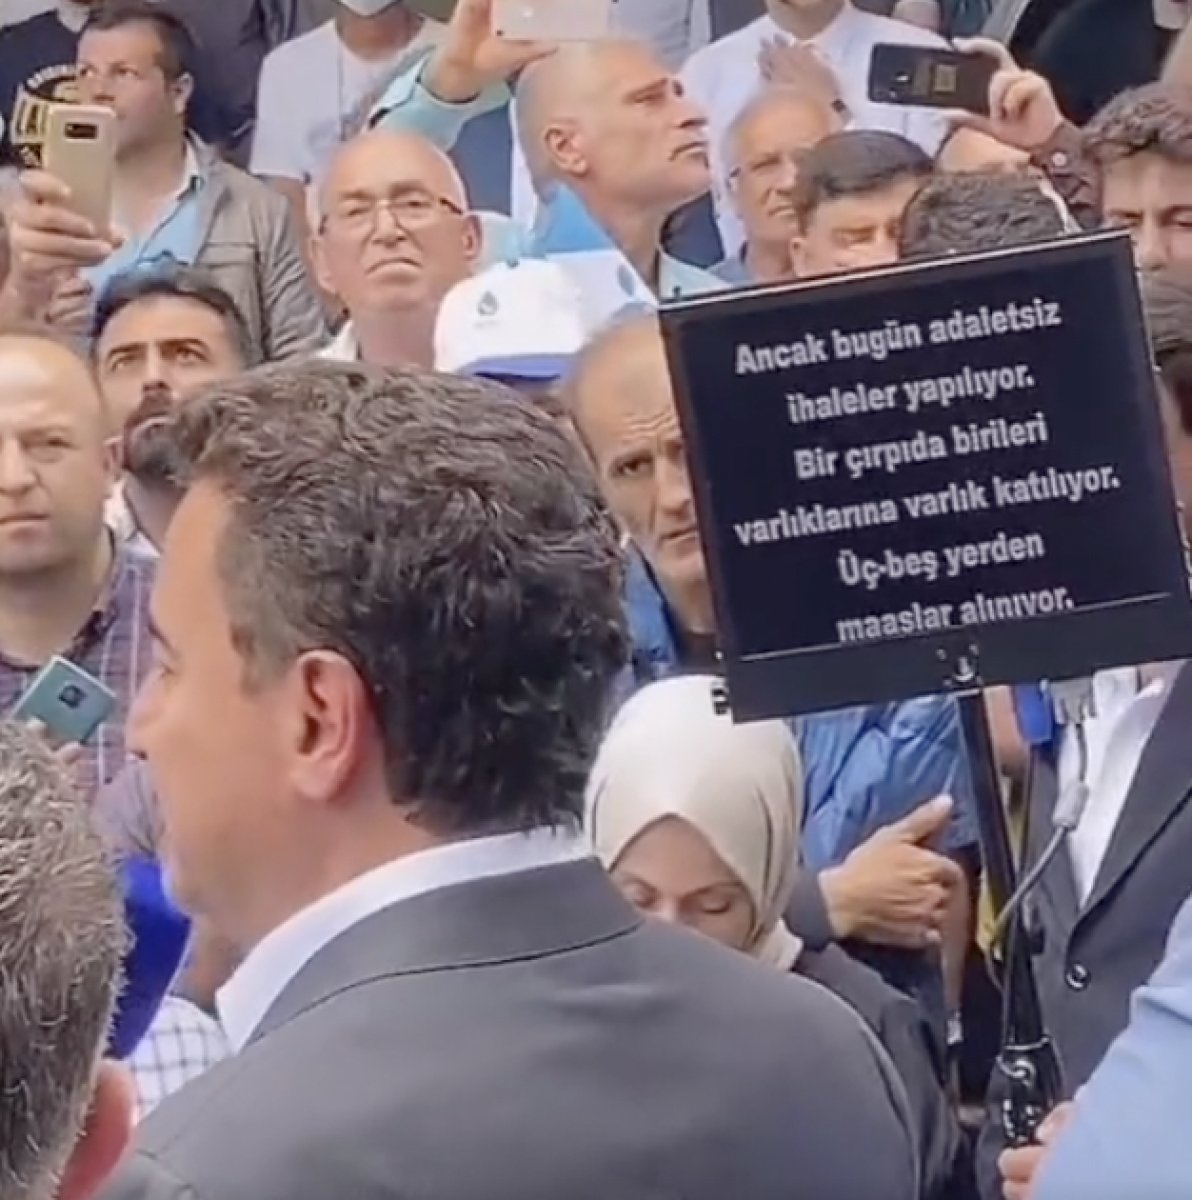 Ali Babacan prompter